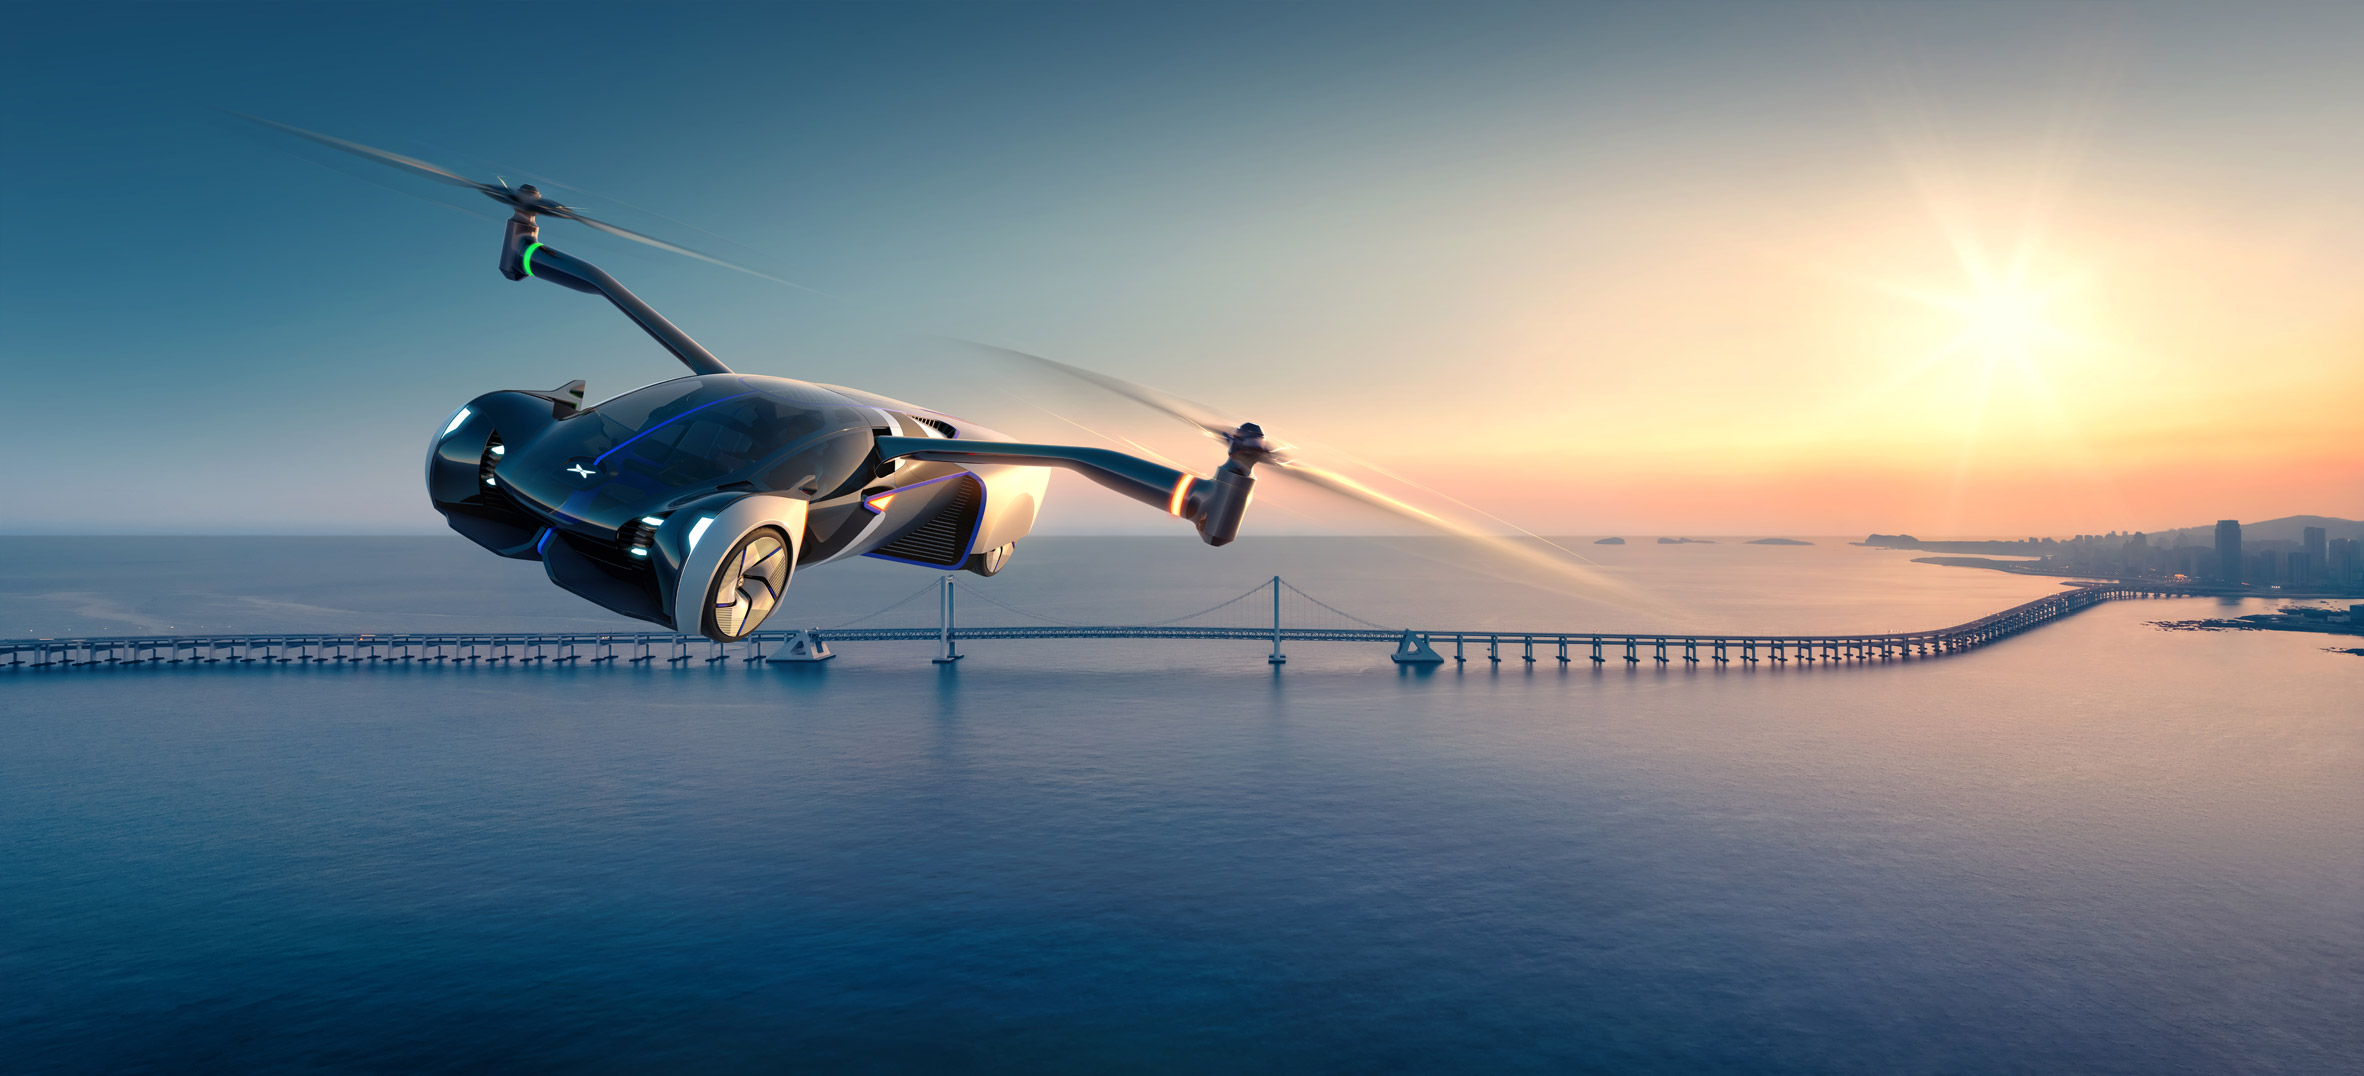 Rendering of XPeng flying car soaring through the sky over a bridge and water